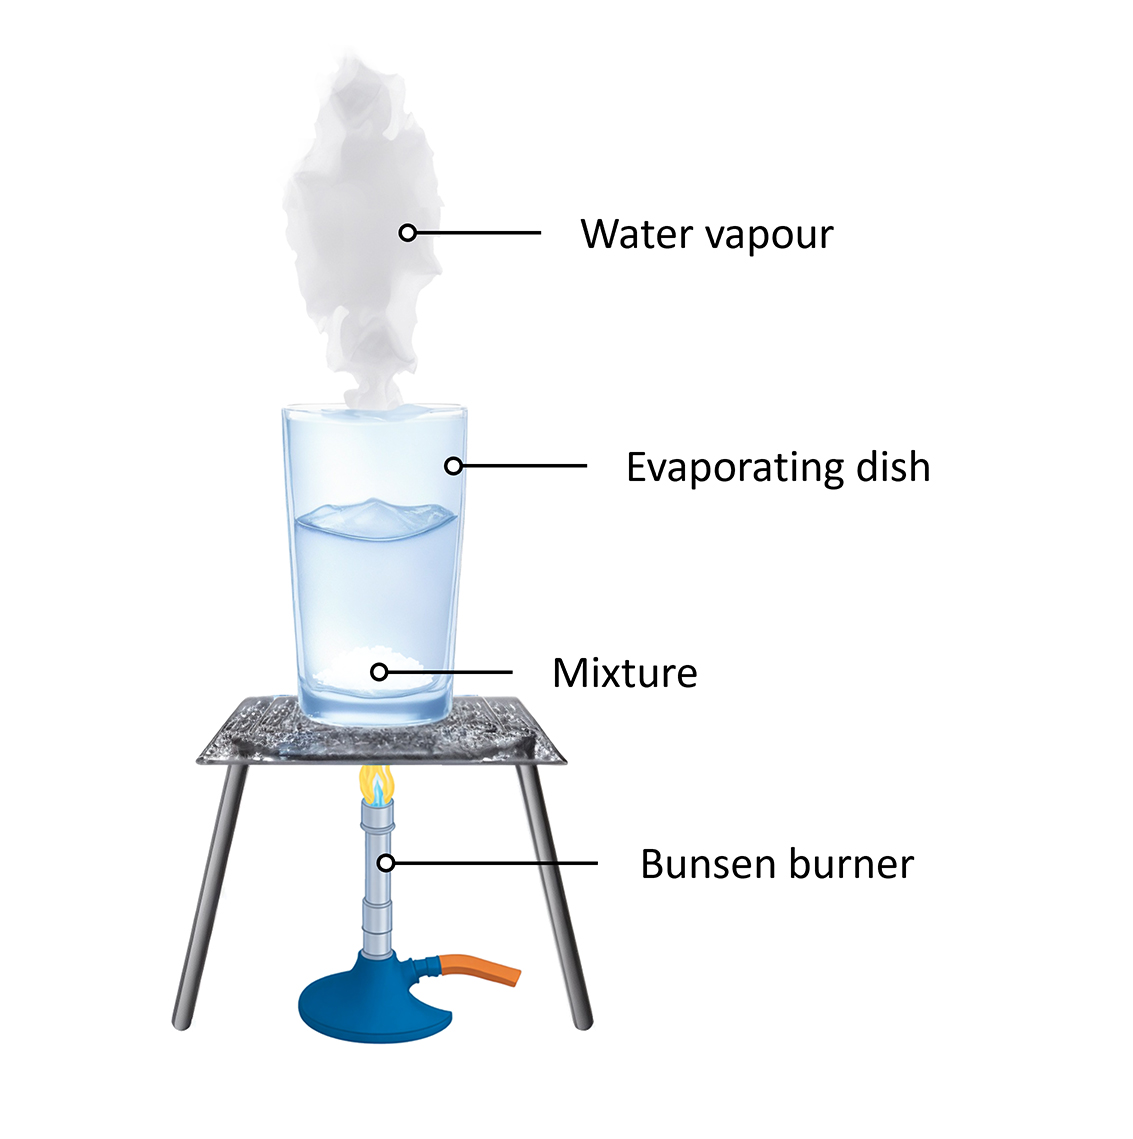 This image illustrates a scientific experiment involving heating a mixture in an evaporating dish using a Bunsen burner, resulting in the production of water vapor. The various components of the setup are labeled.